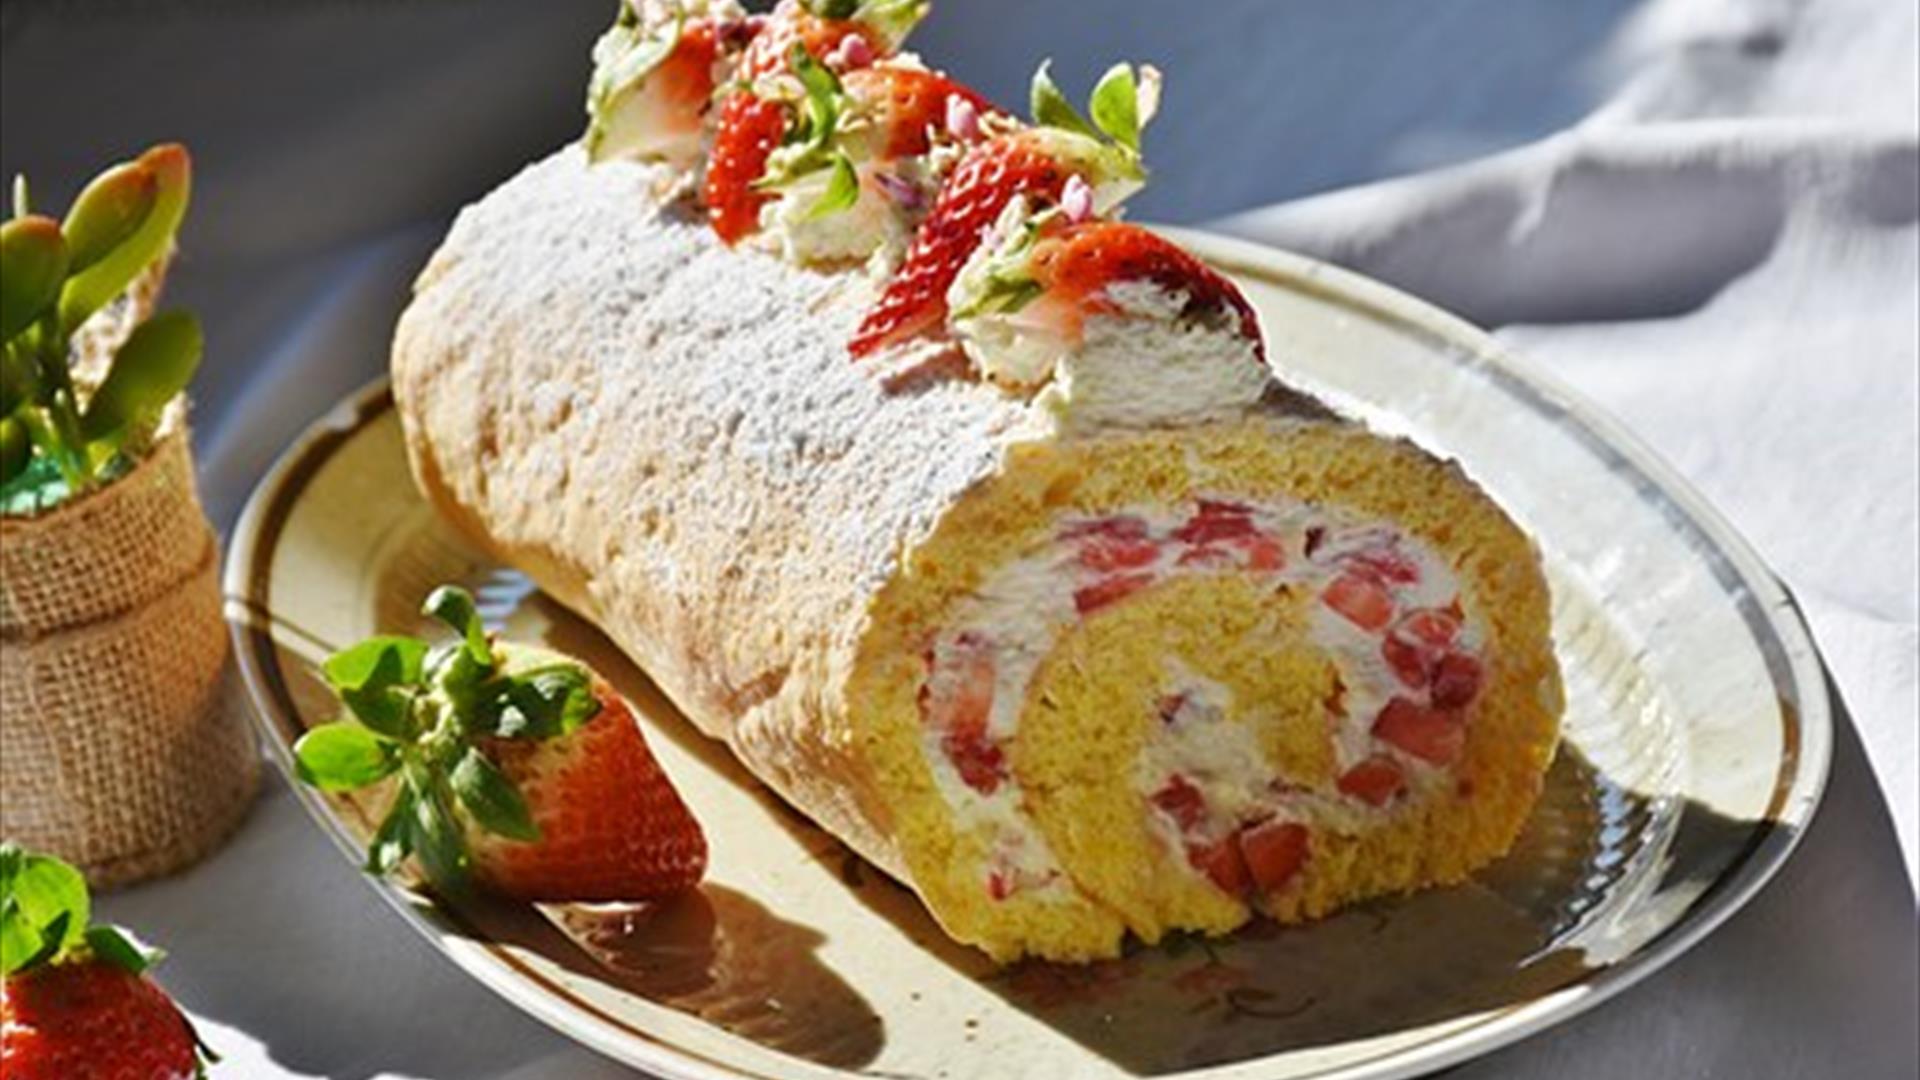 Image is of a strawberry and cake roll